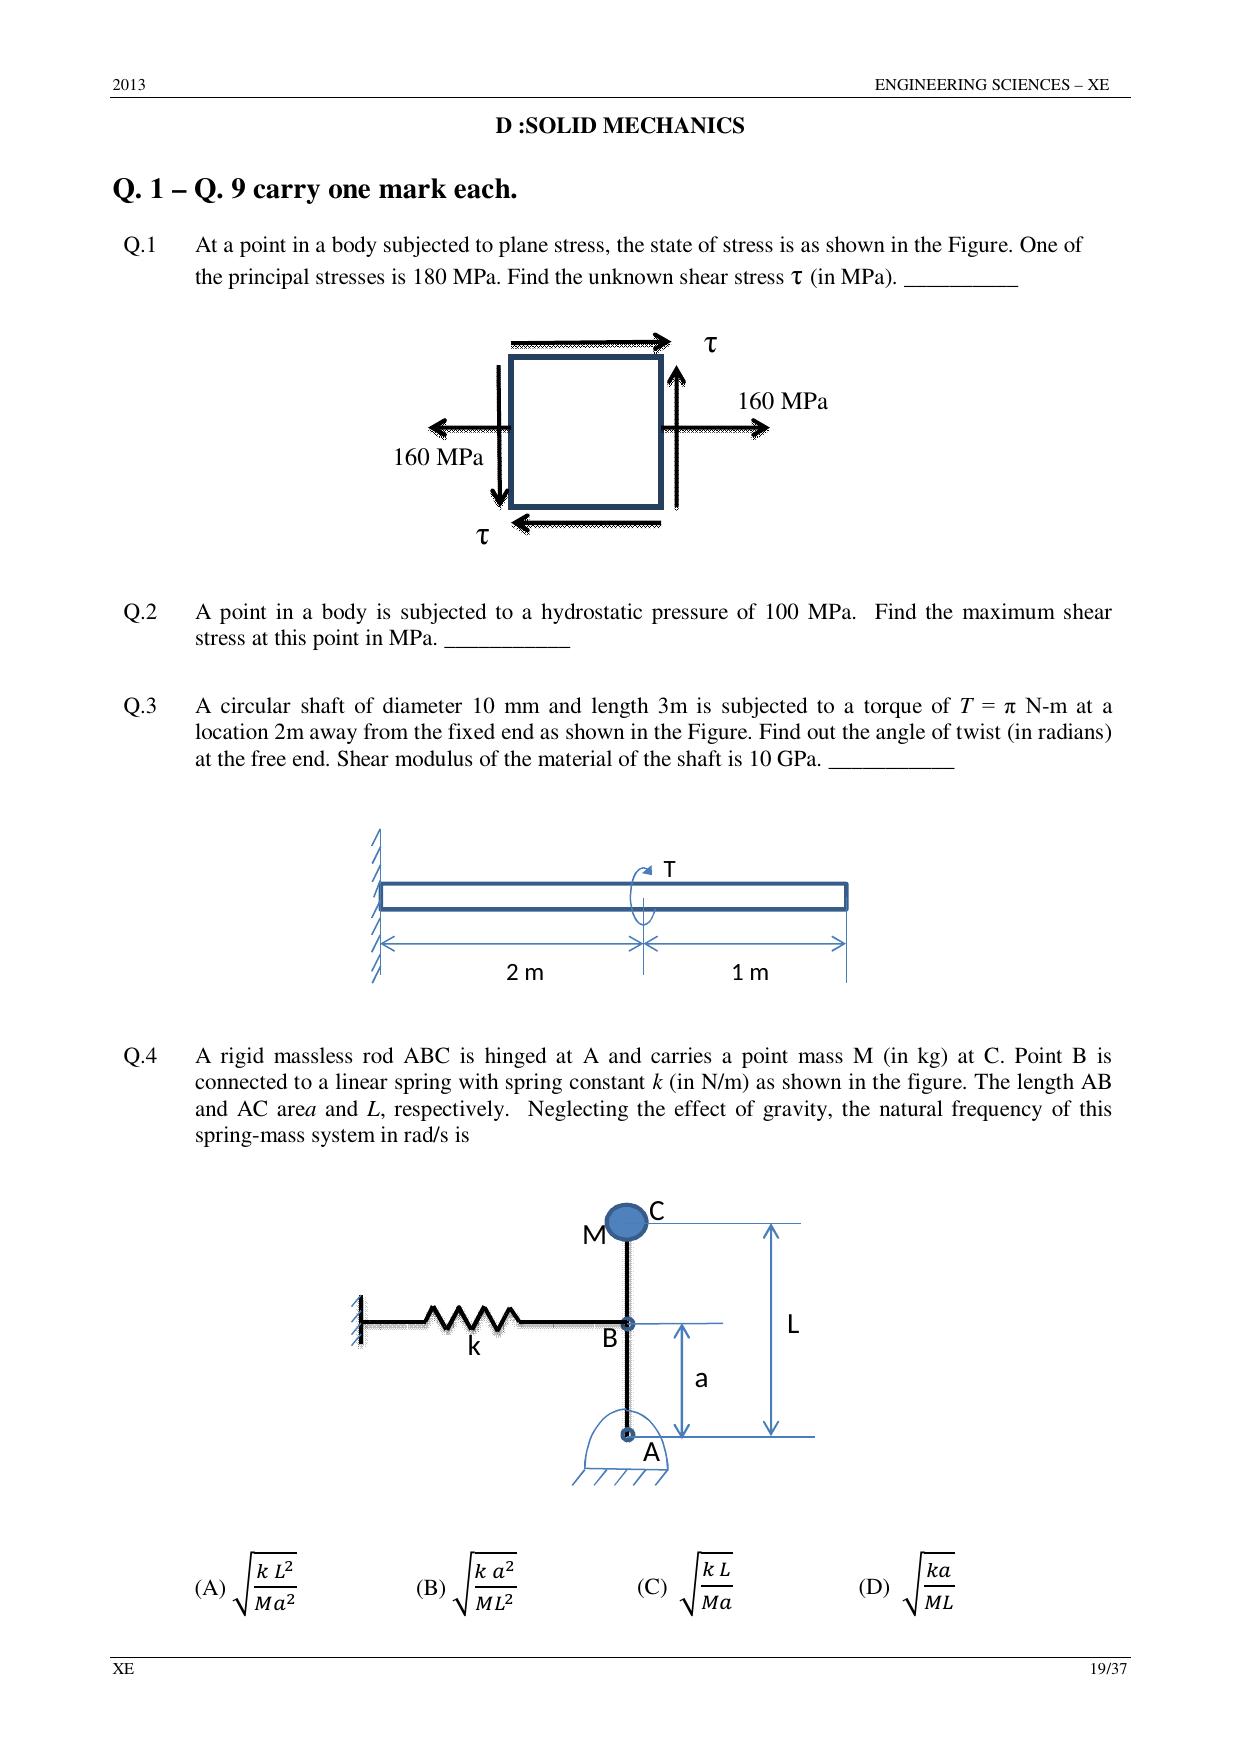 GATE 2013 Engineering Sciences (XE) Question Paper with Answer Key - Page 19